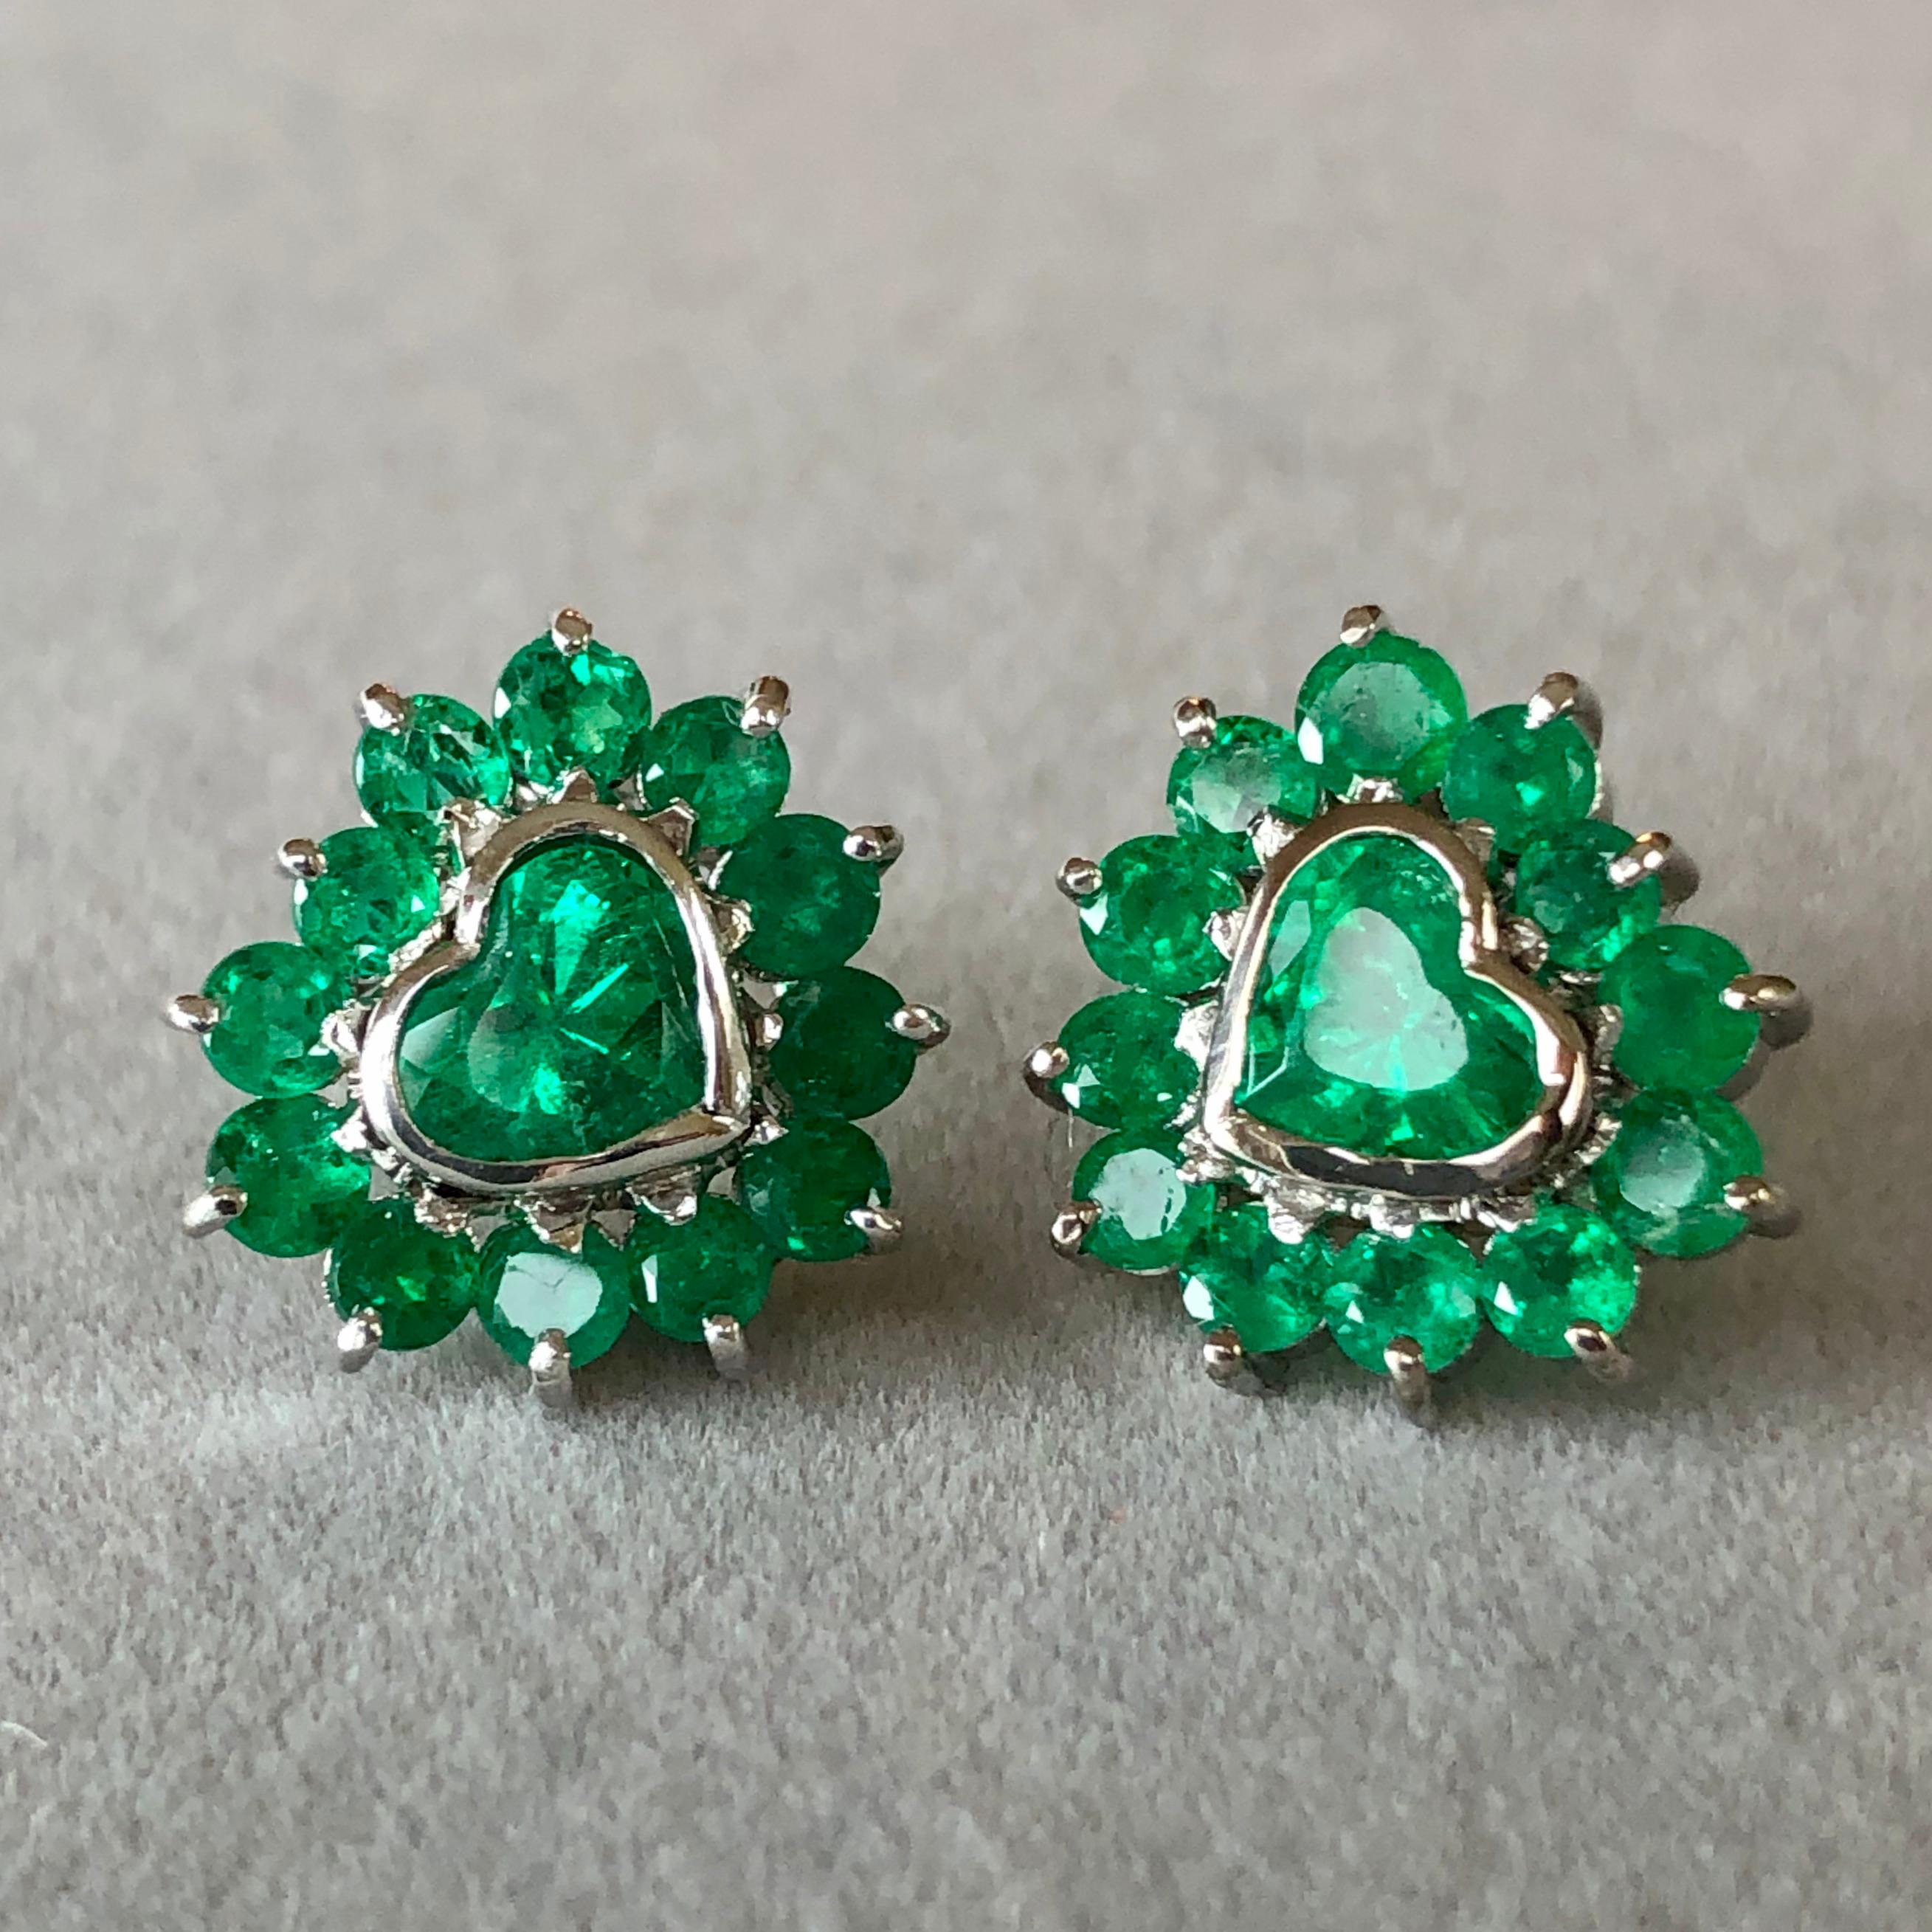 18k earrings with 2 heart shape Colombian emeralds weighing 2.00 carats and 26 round Colombian emeralds weighing 2.85 carats. The beauty of heart shapes- perfectly matched Colombian emeralds are exquisitely handcrafted 18K white gold mountings.